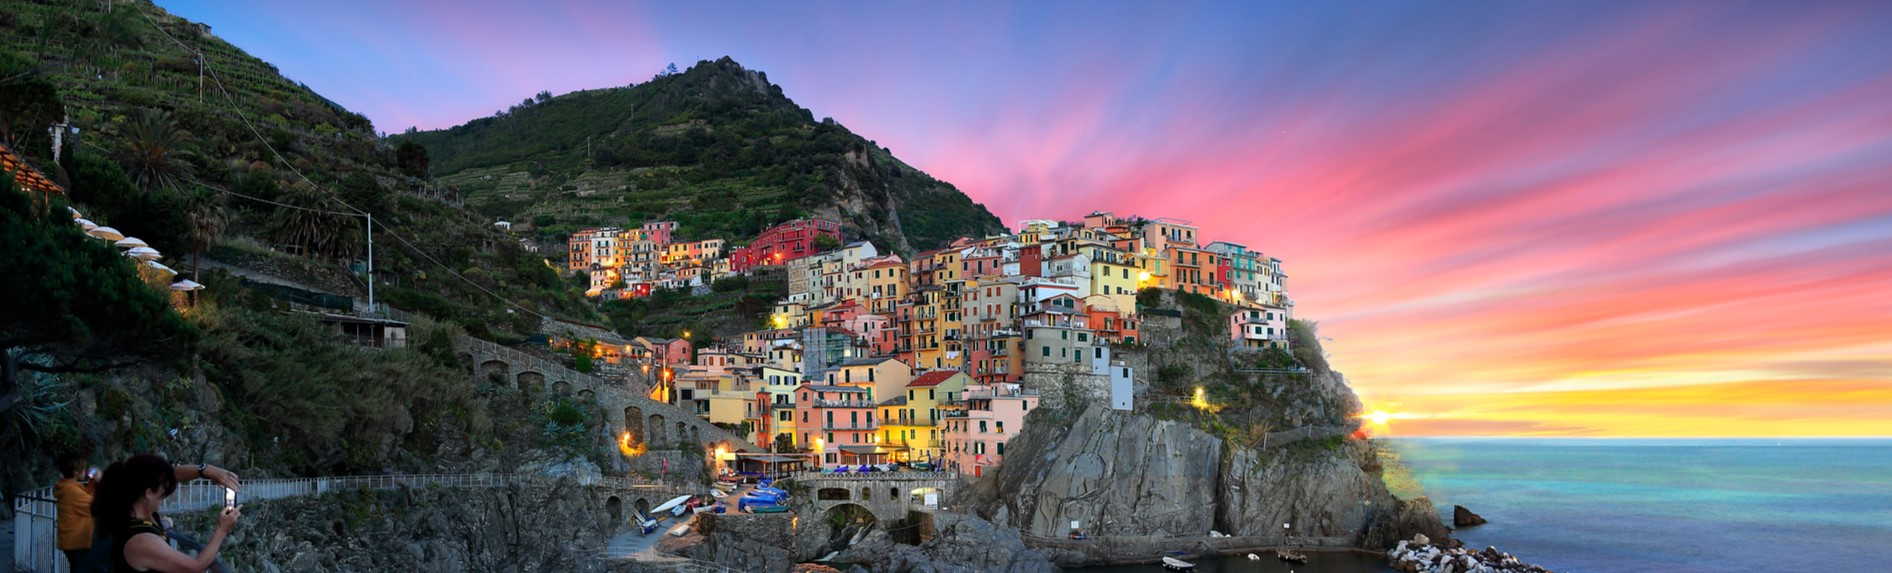 What are the villages of Cinque Terre?